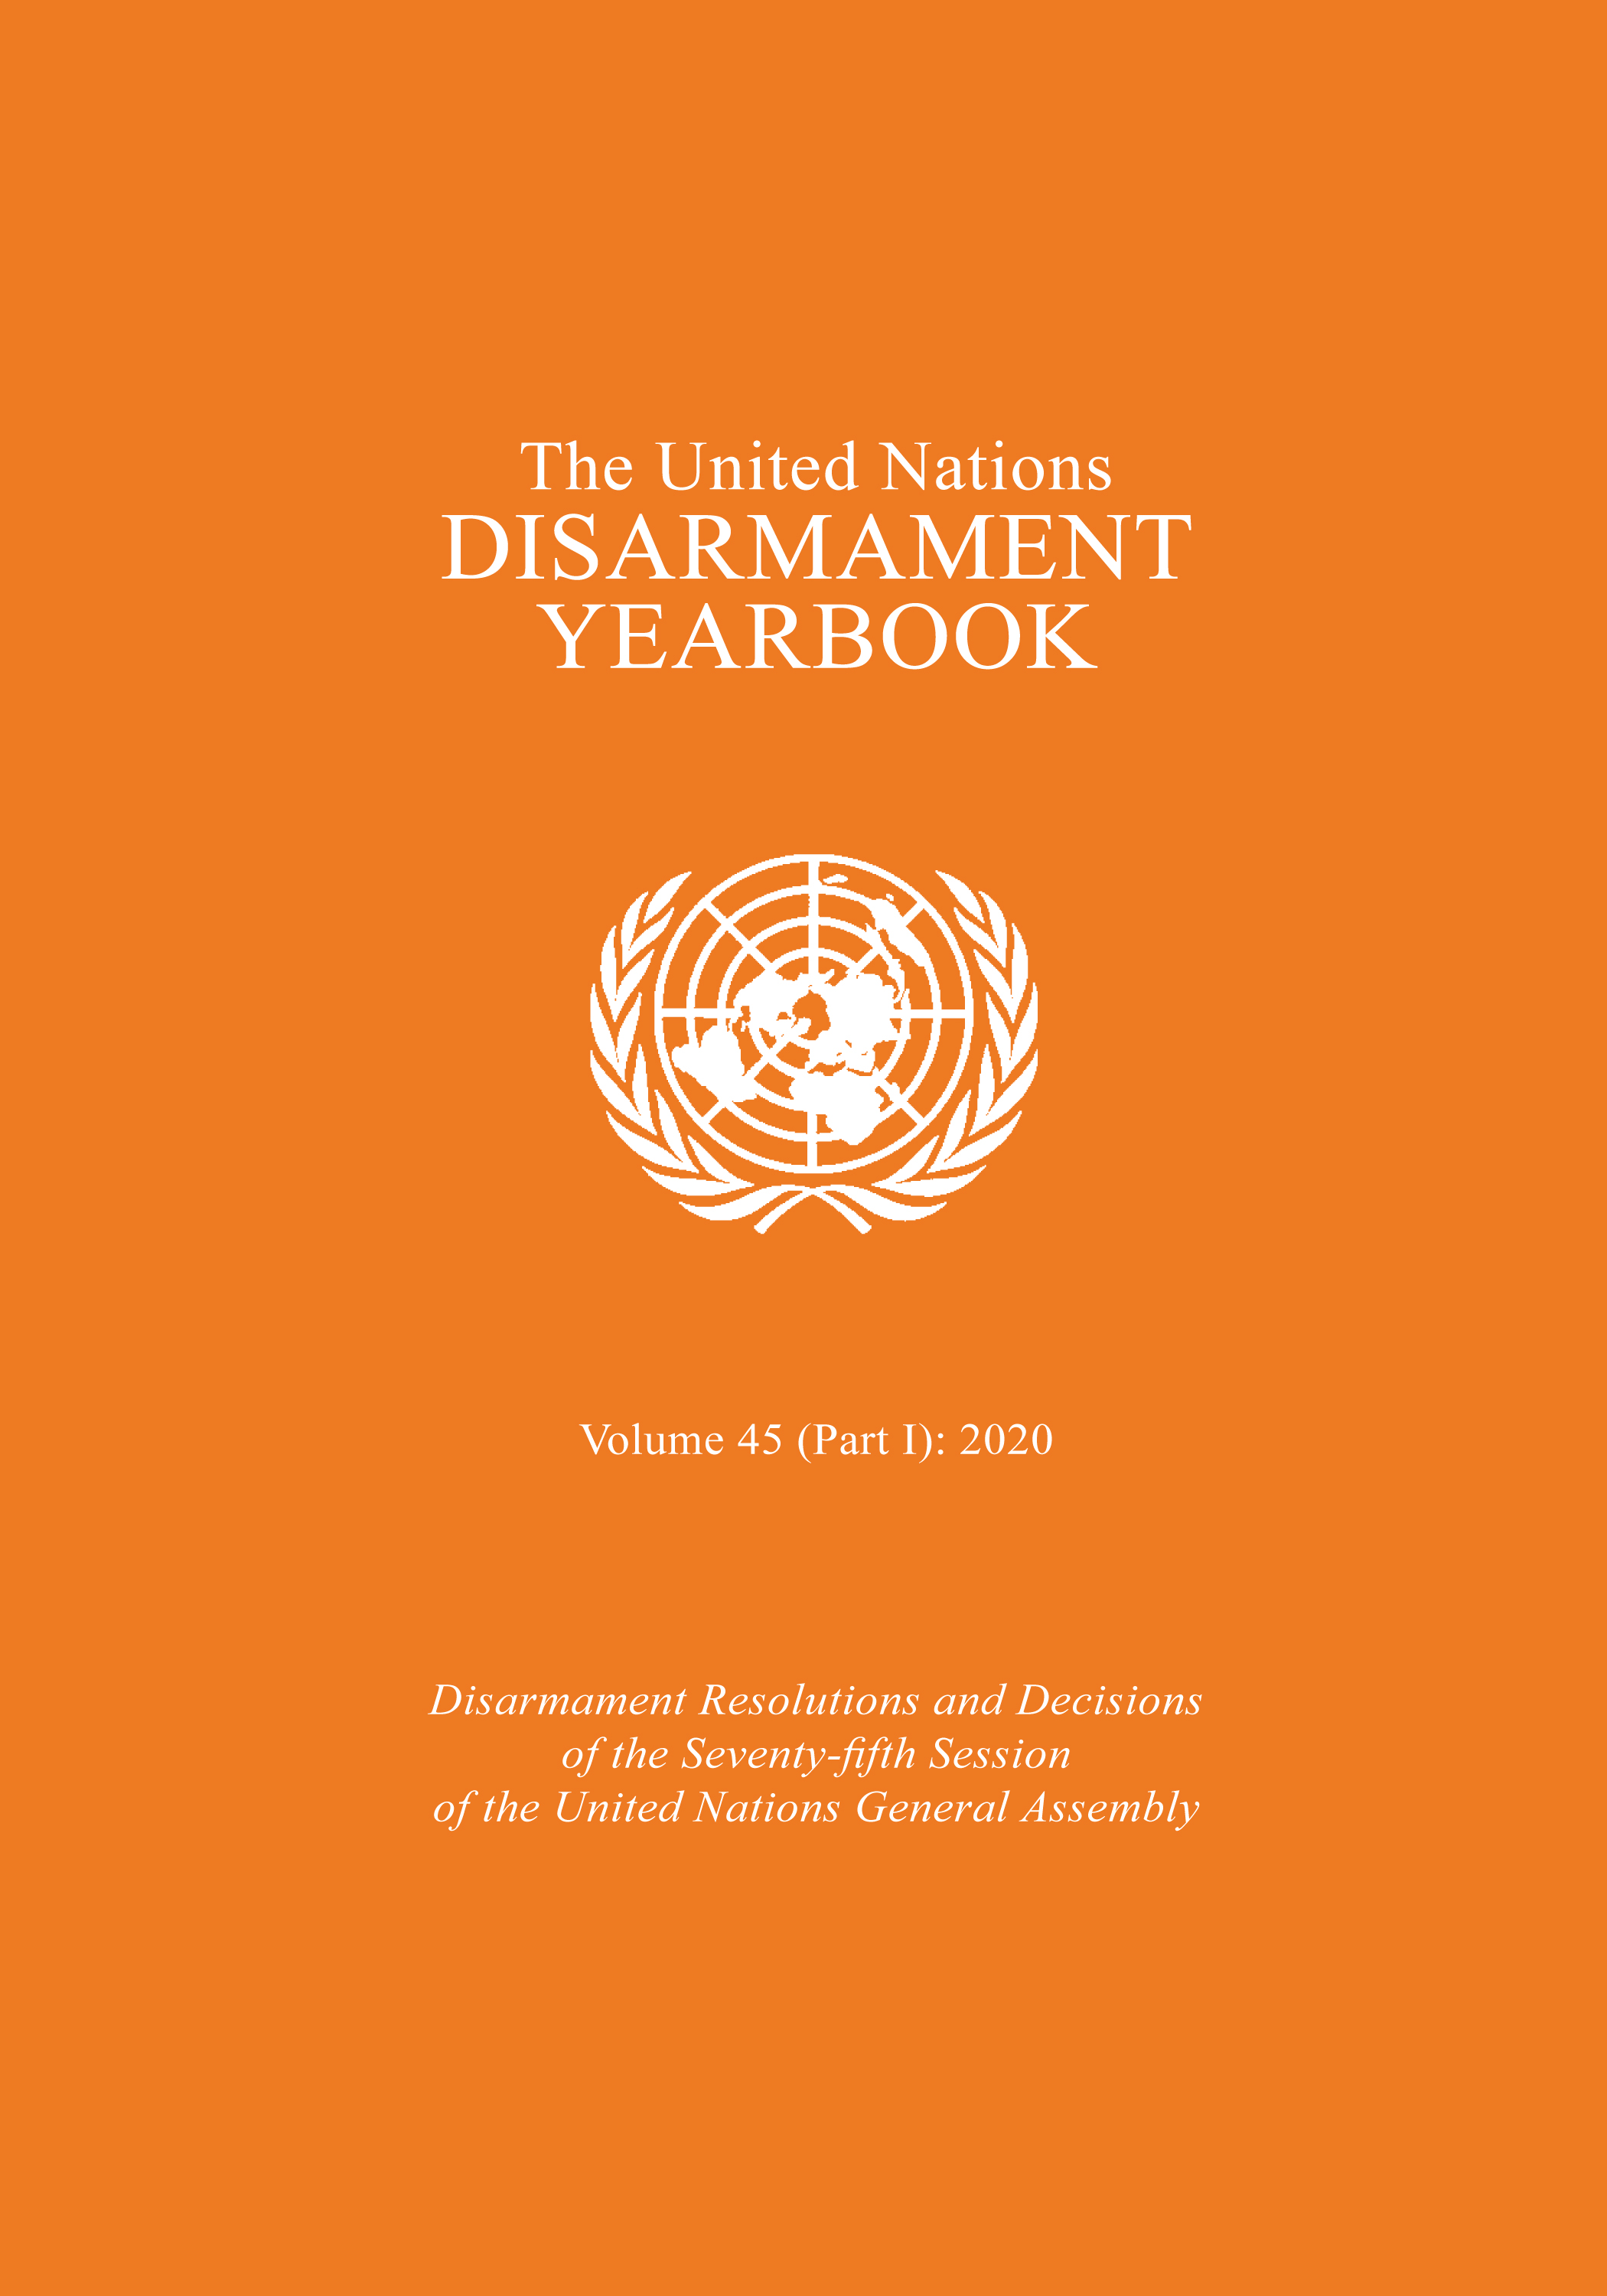 image of United Nations Disarmament Yearbook 2020: Part I